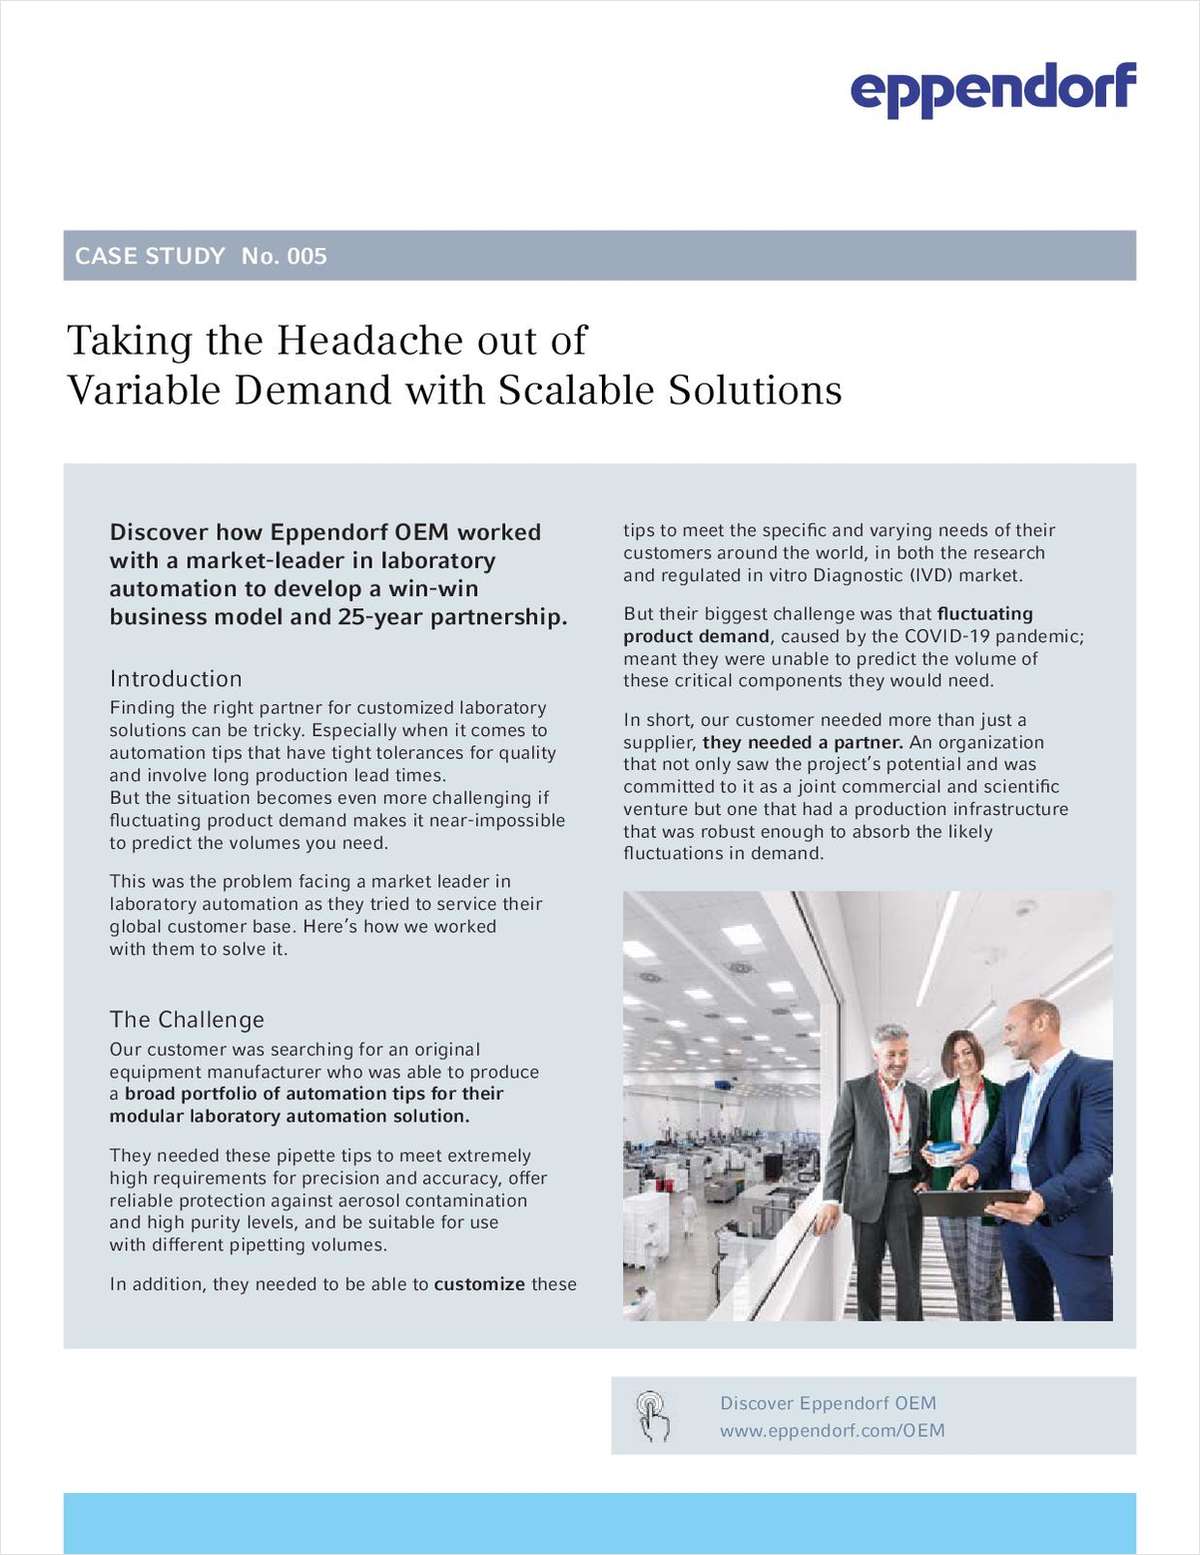 Taking the Headache out of Variable Demand with Scalable Solutions